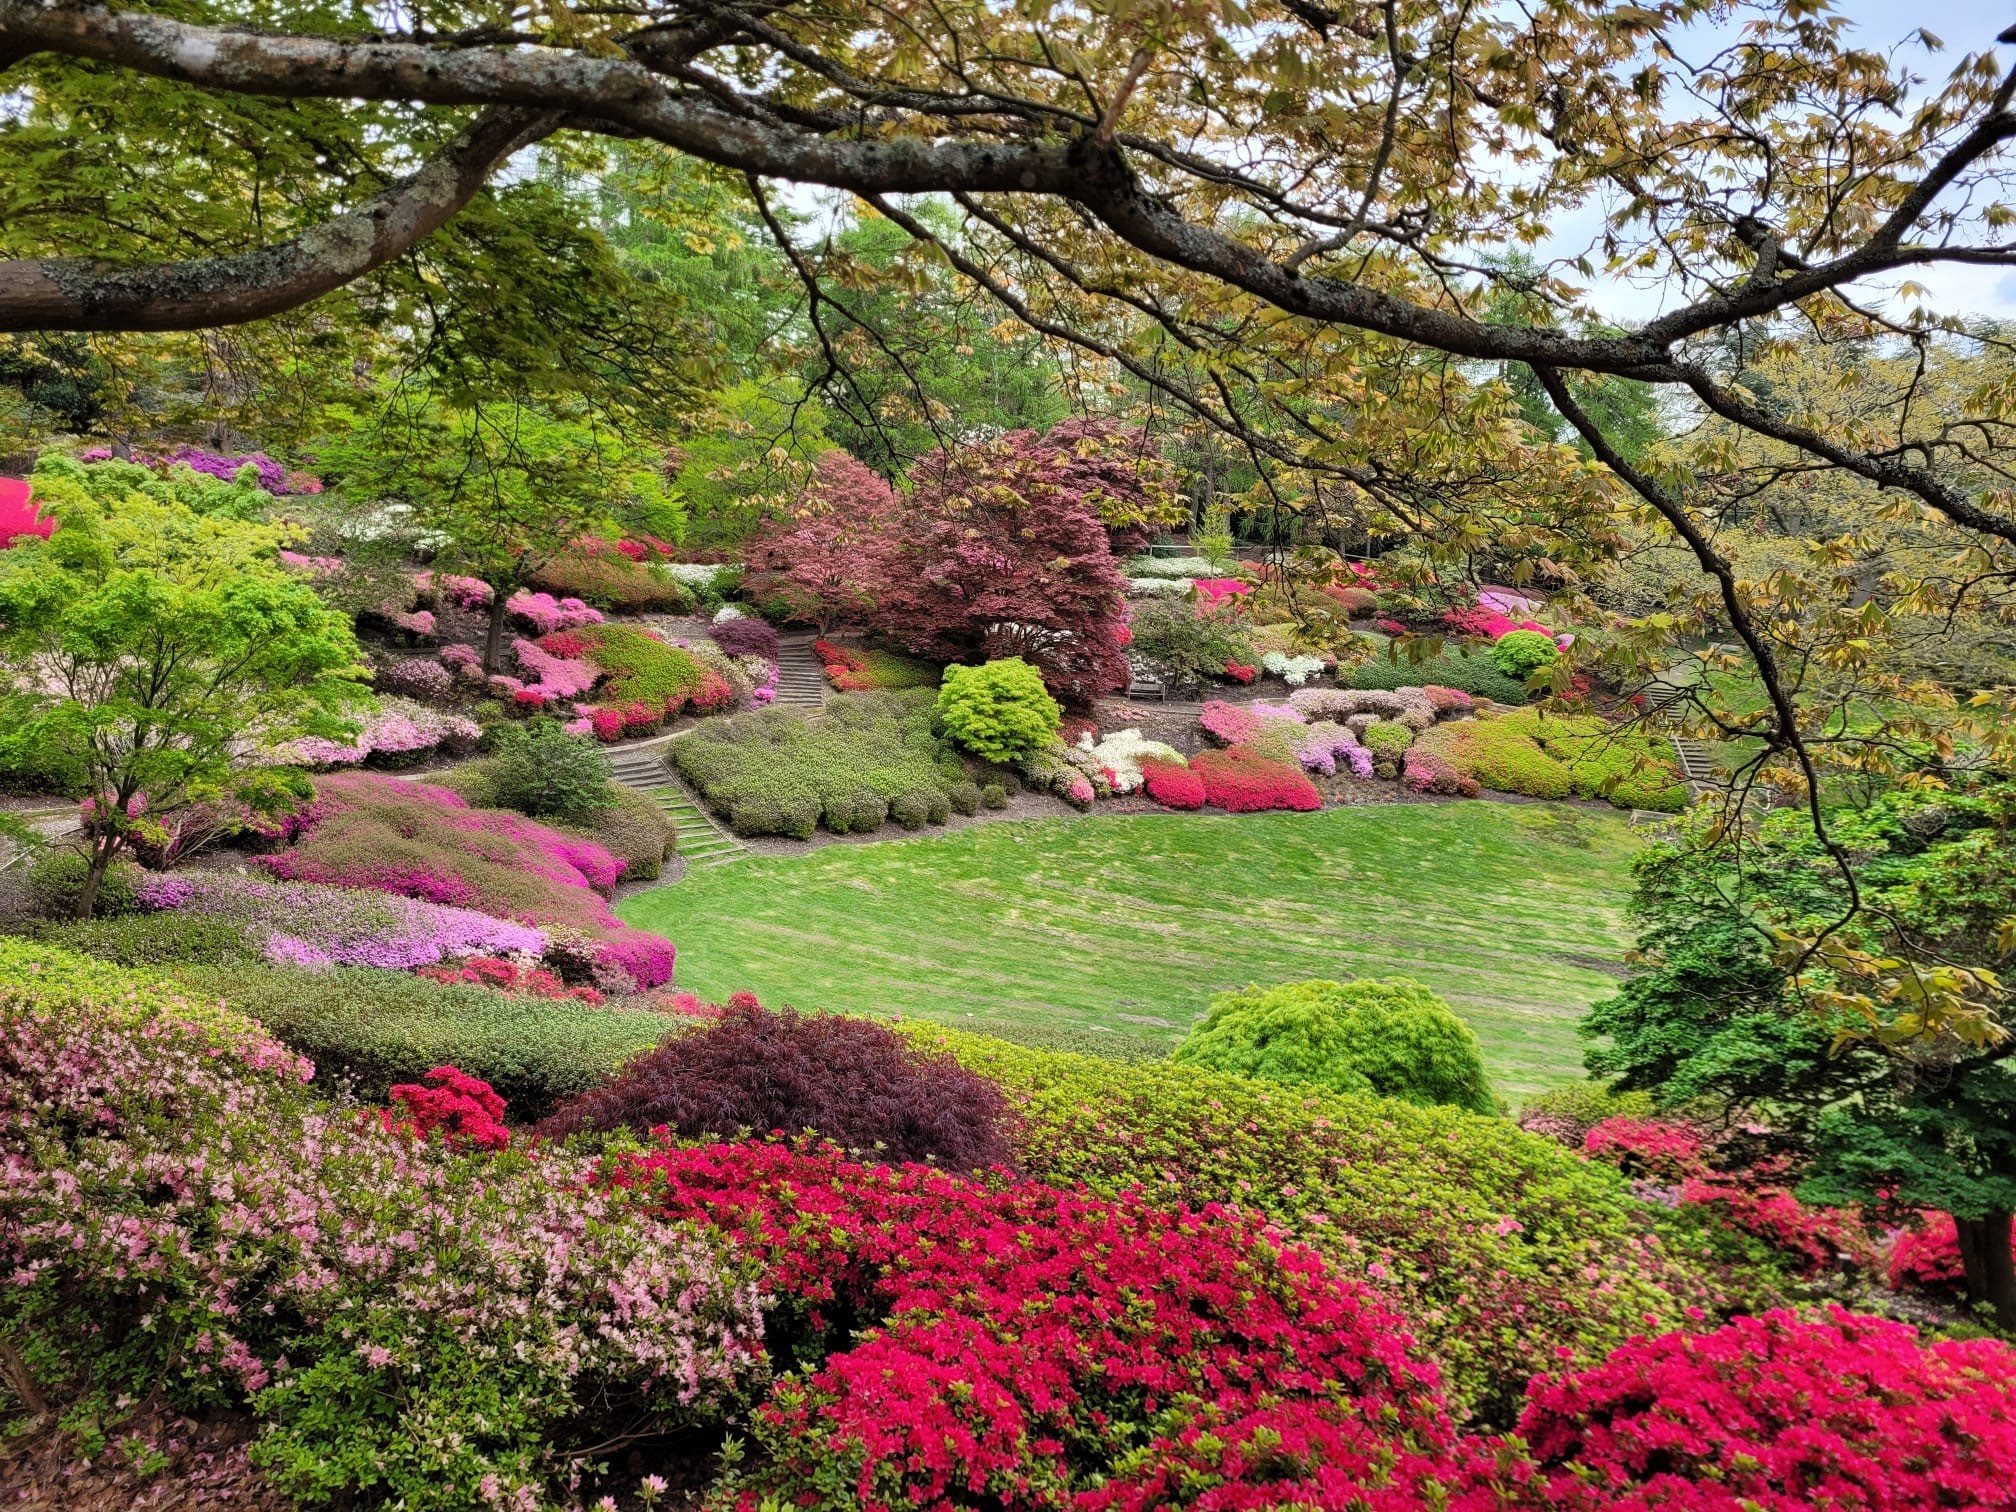 The Valley Gardens Punch Bowl surrounded by flowering shrubbery